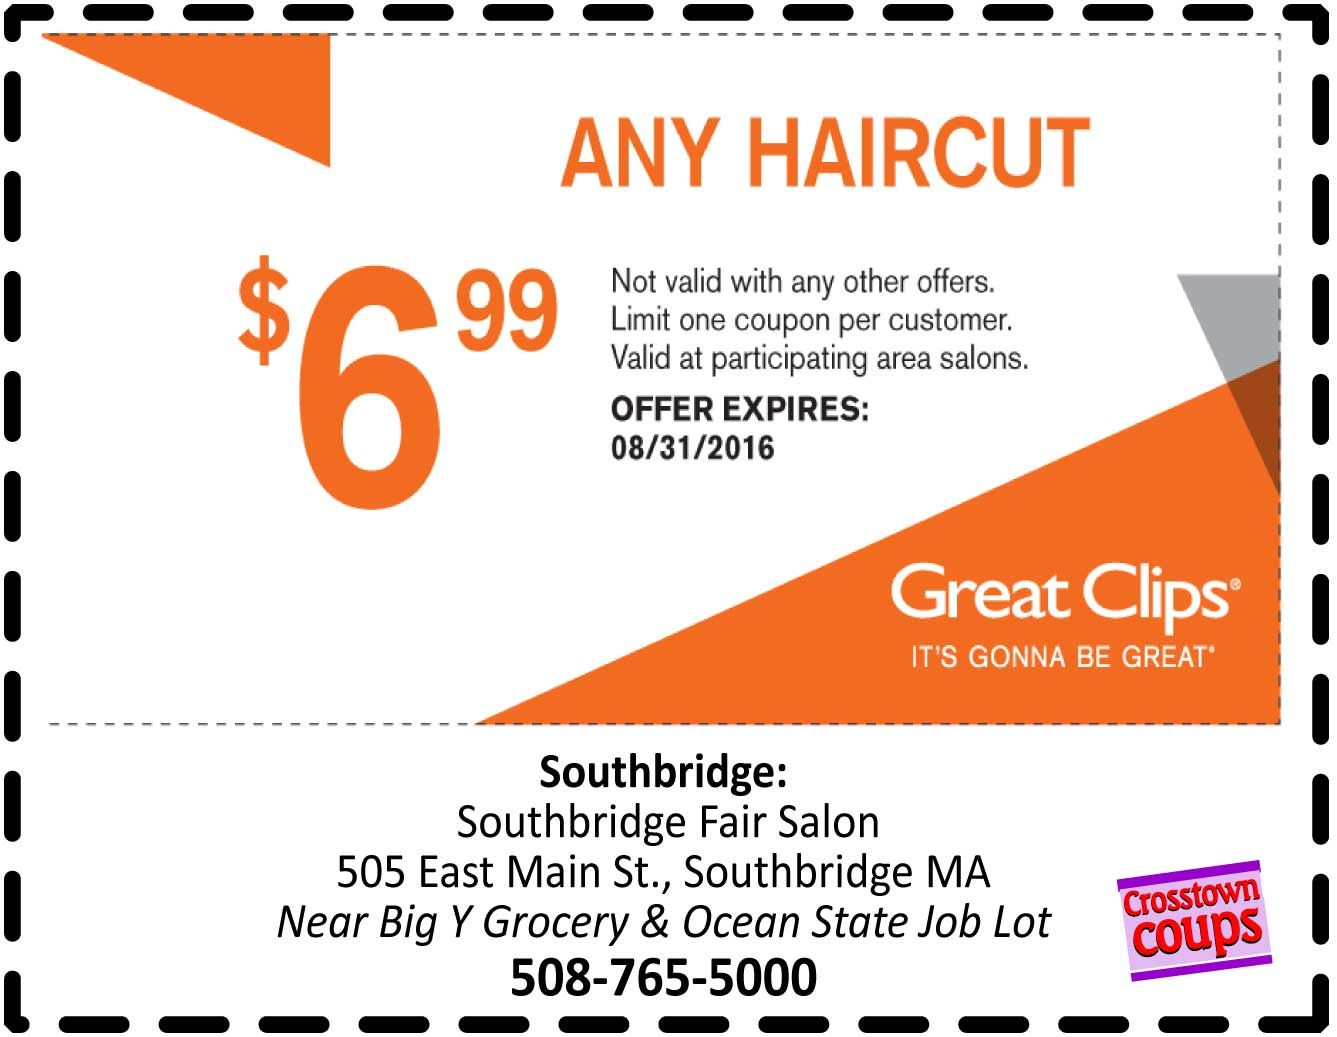 27 Great Clips Free Haircut Coupon | Hairstyles Ideas - Great Clips Free Coupons Printable